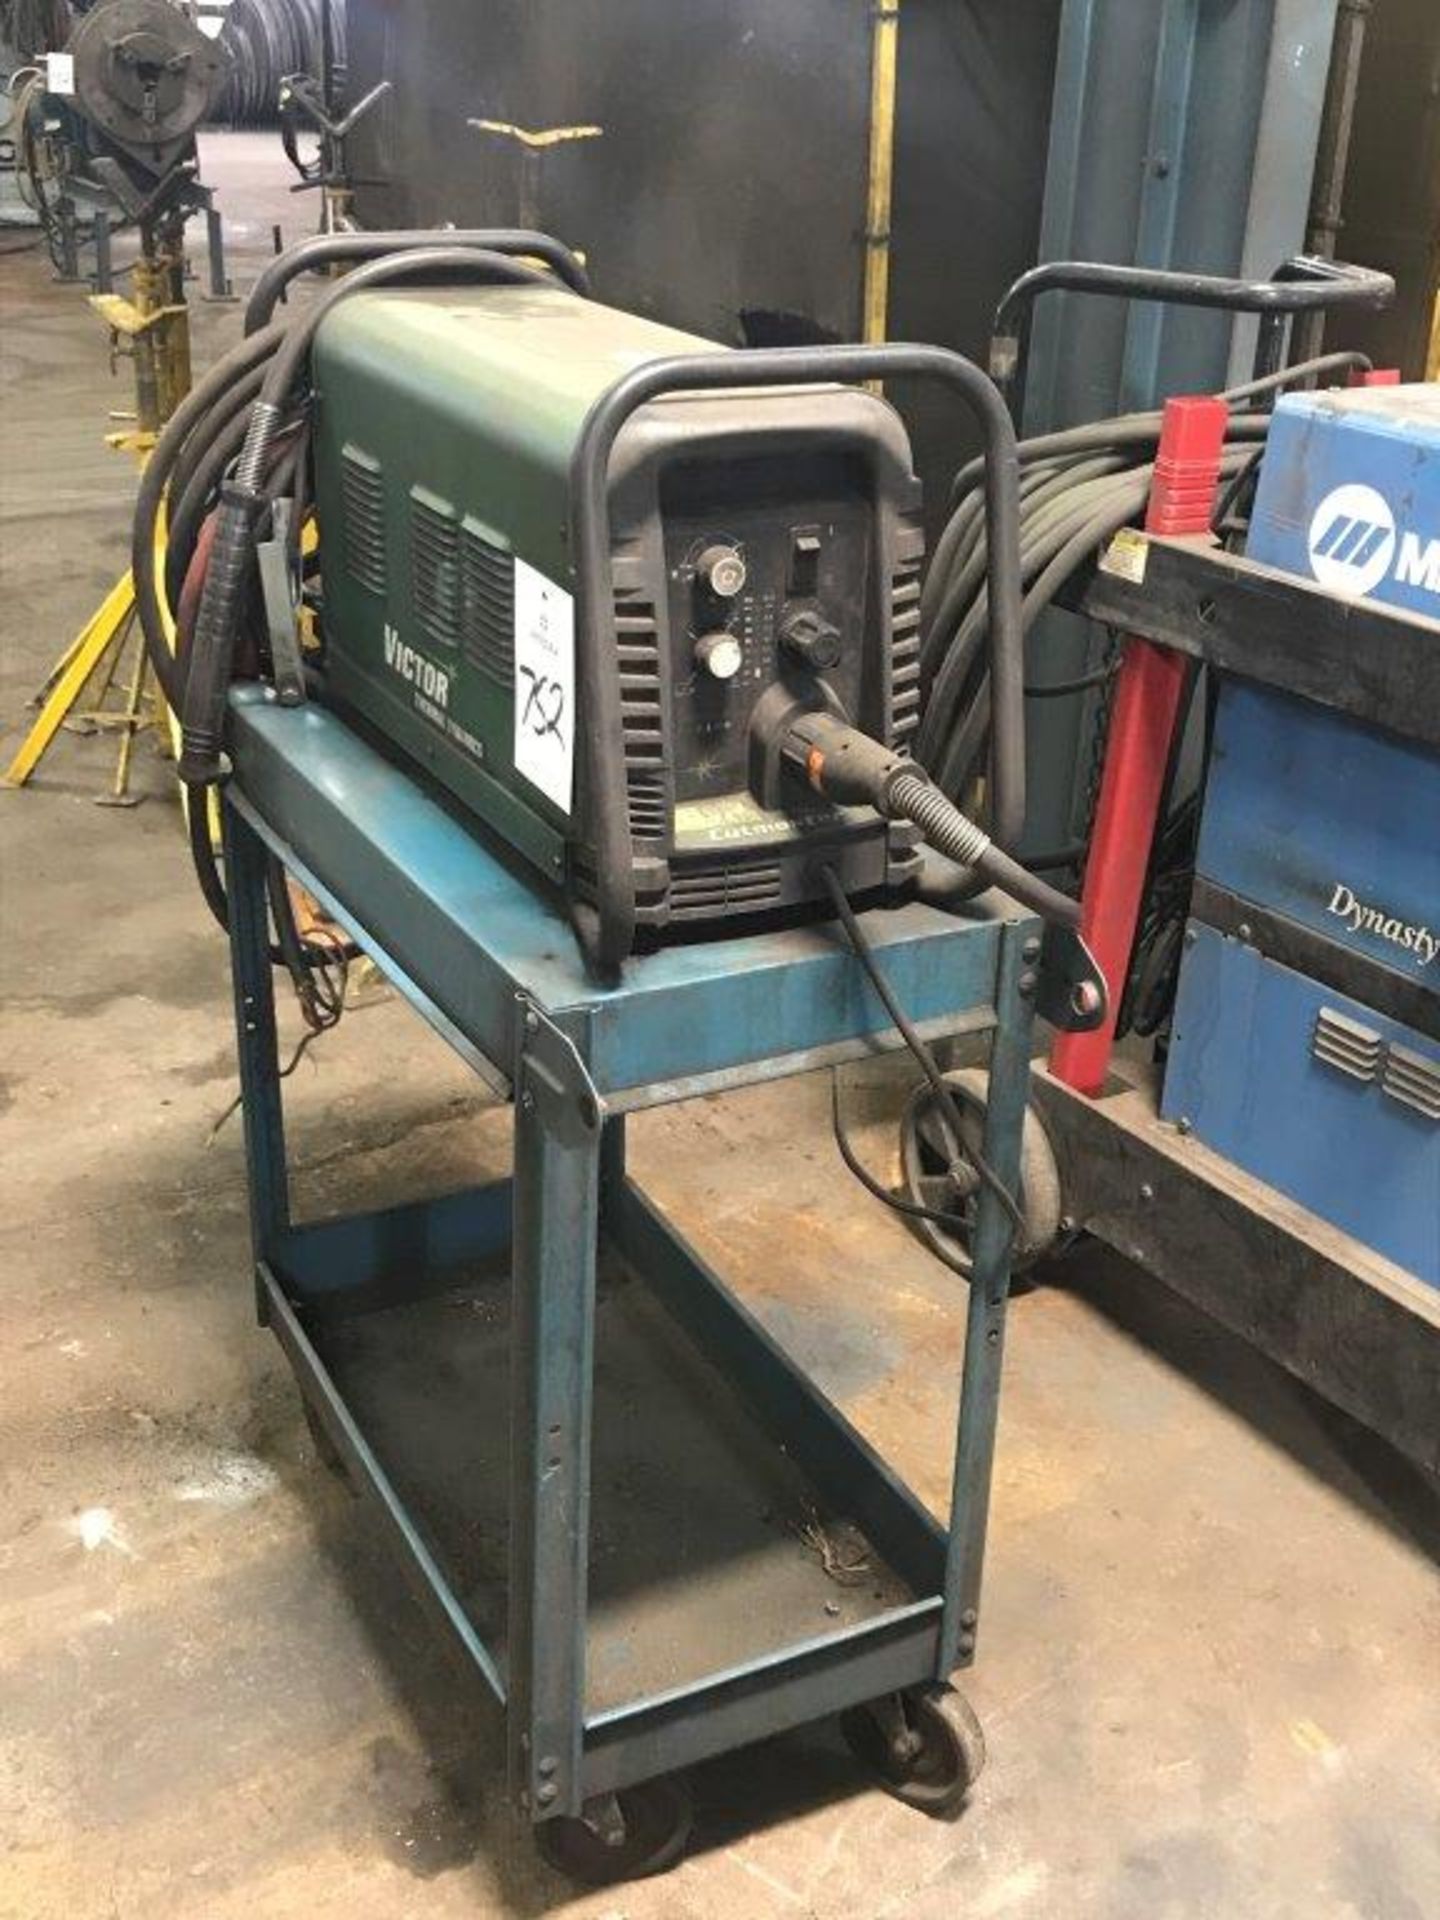 Thermal Dynamics Victor Cutmaster 102 Plasma Cutter